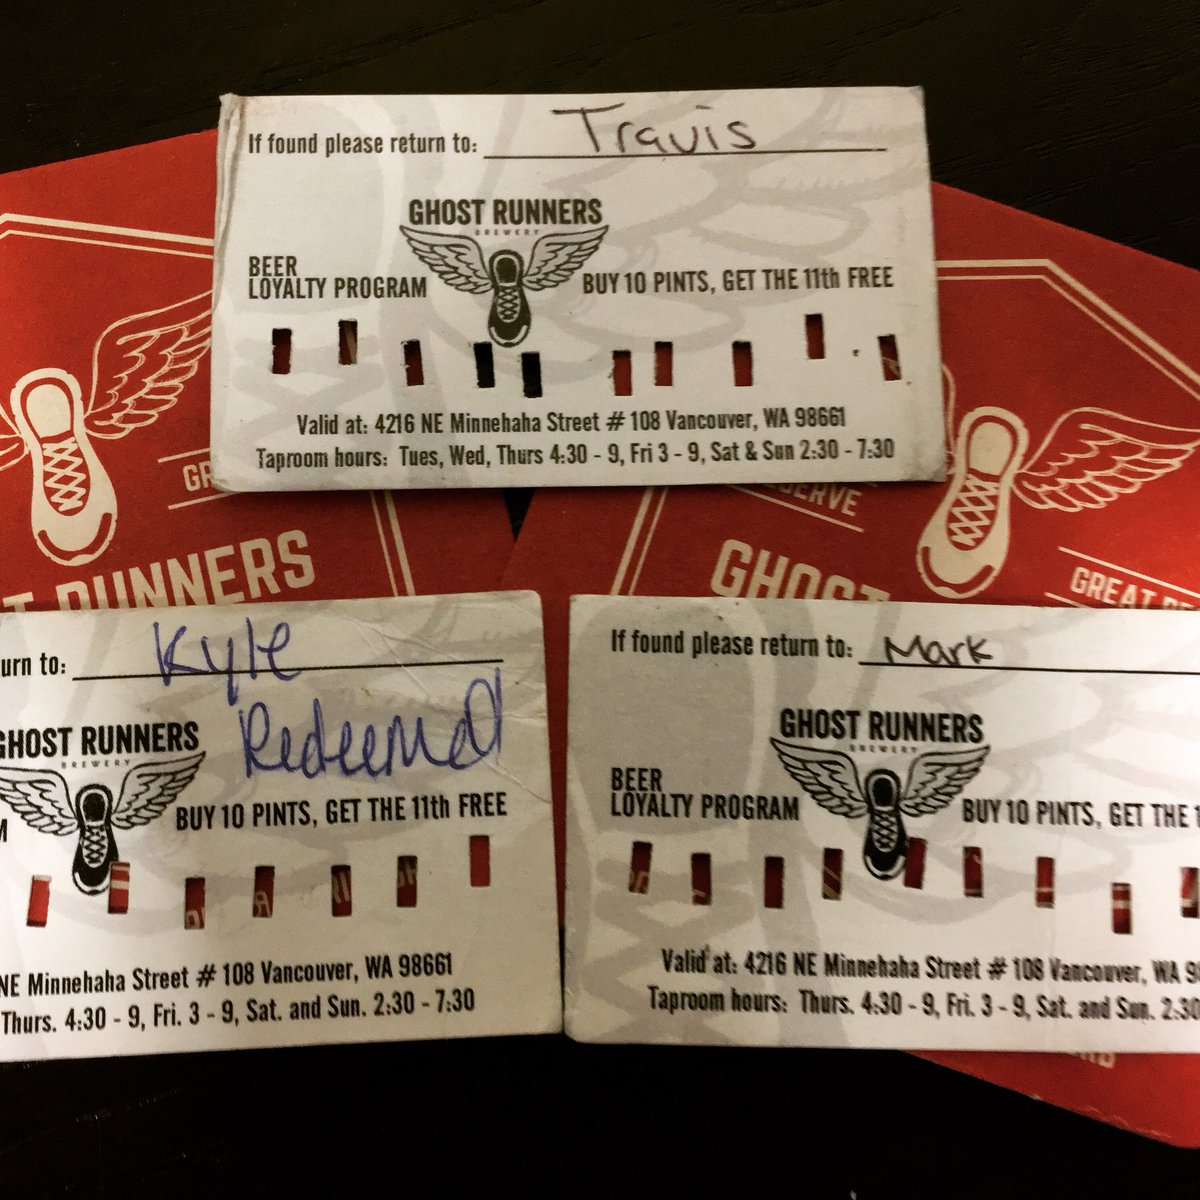 GRB beer loyalty program Wednesday winners are Travis, Mark, and Kyle.  #brewcouver #visitvancouver #freestuffrocks